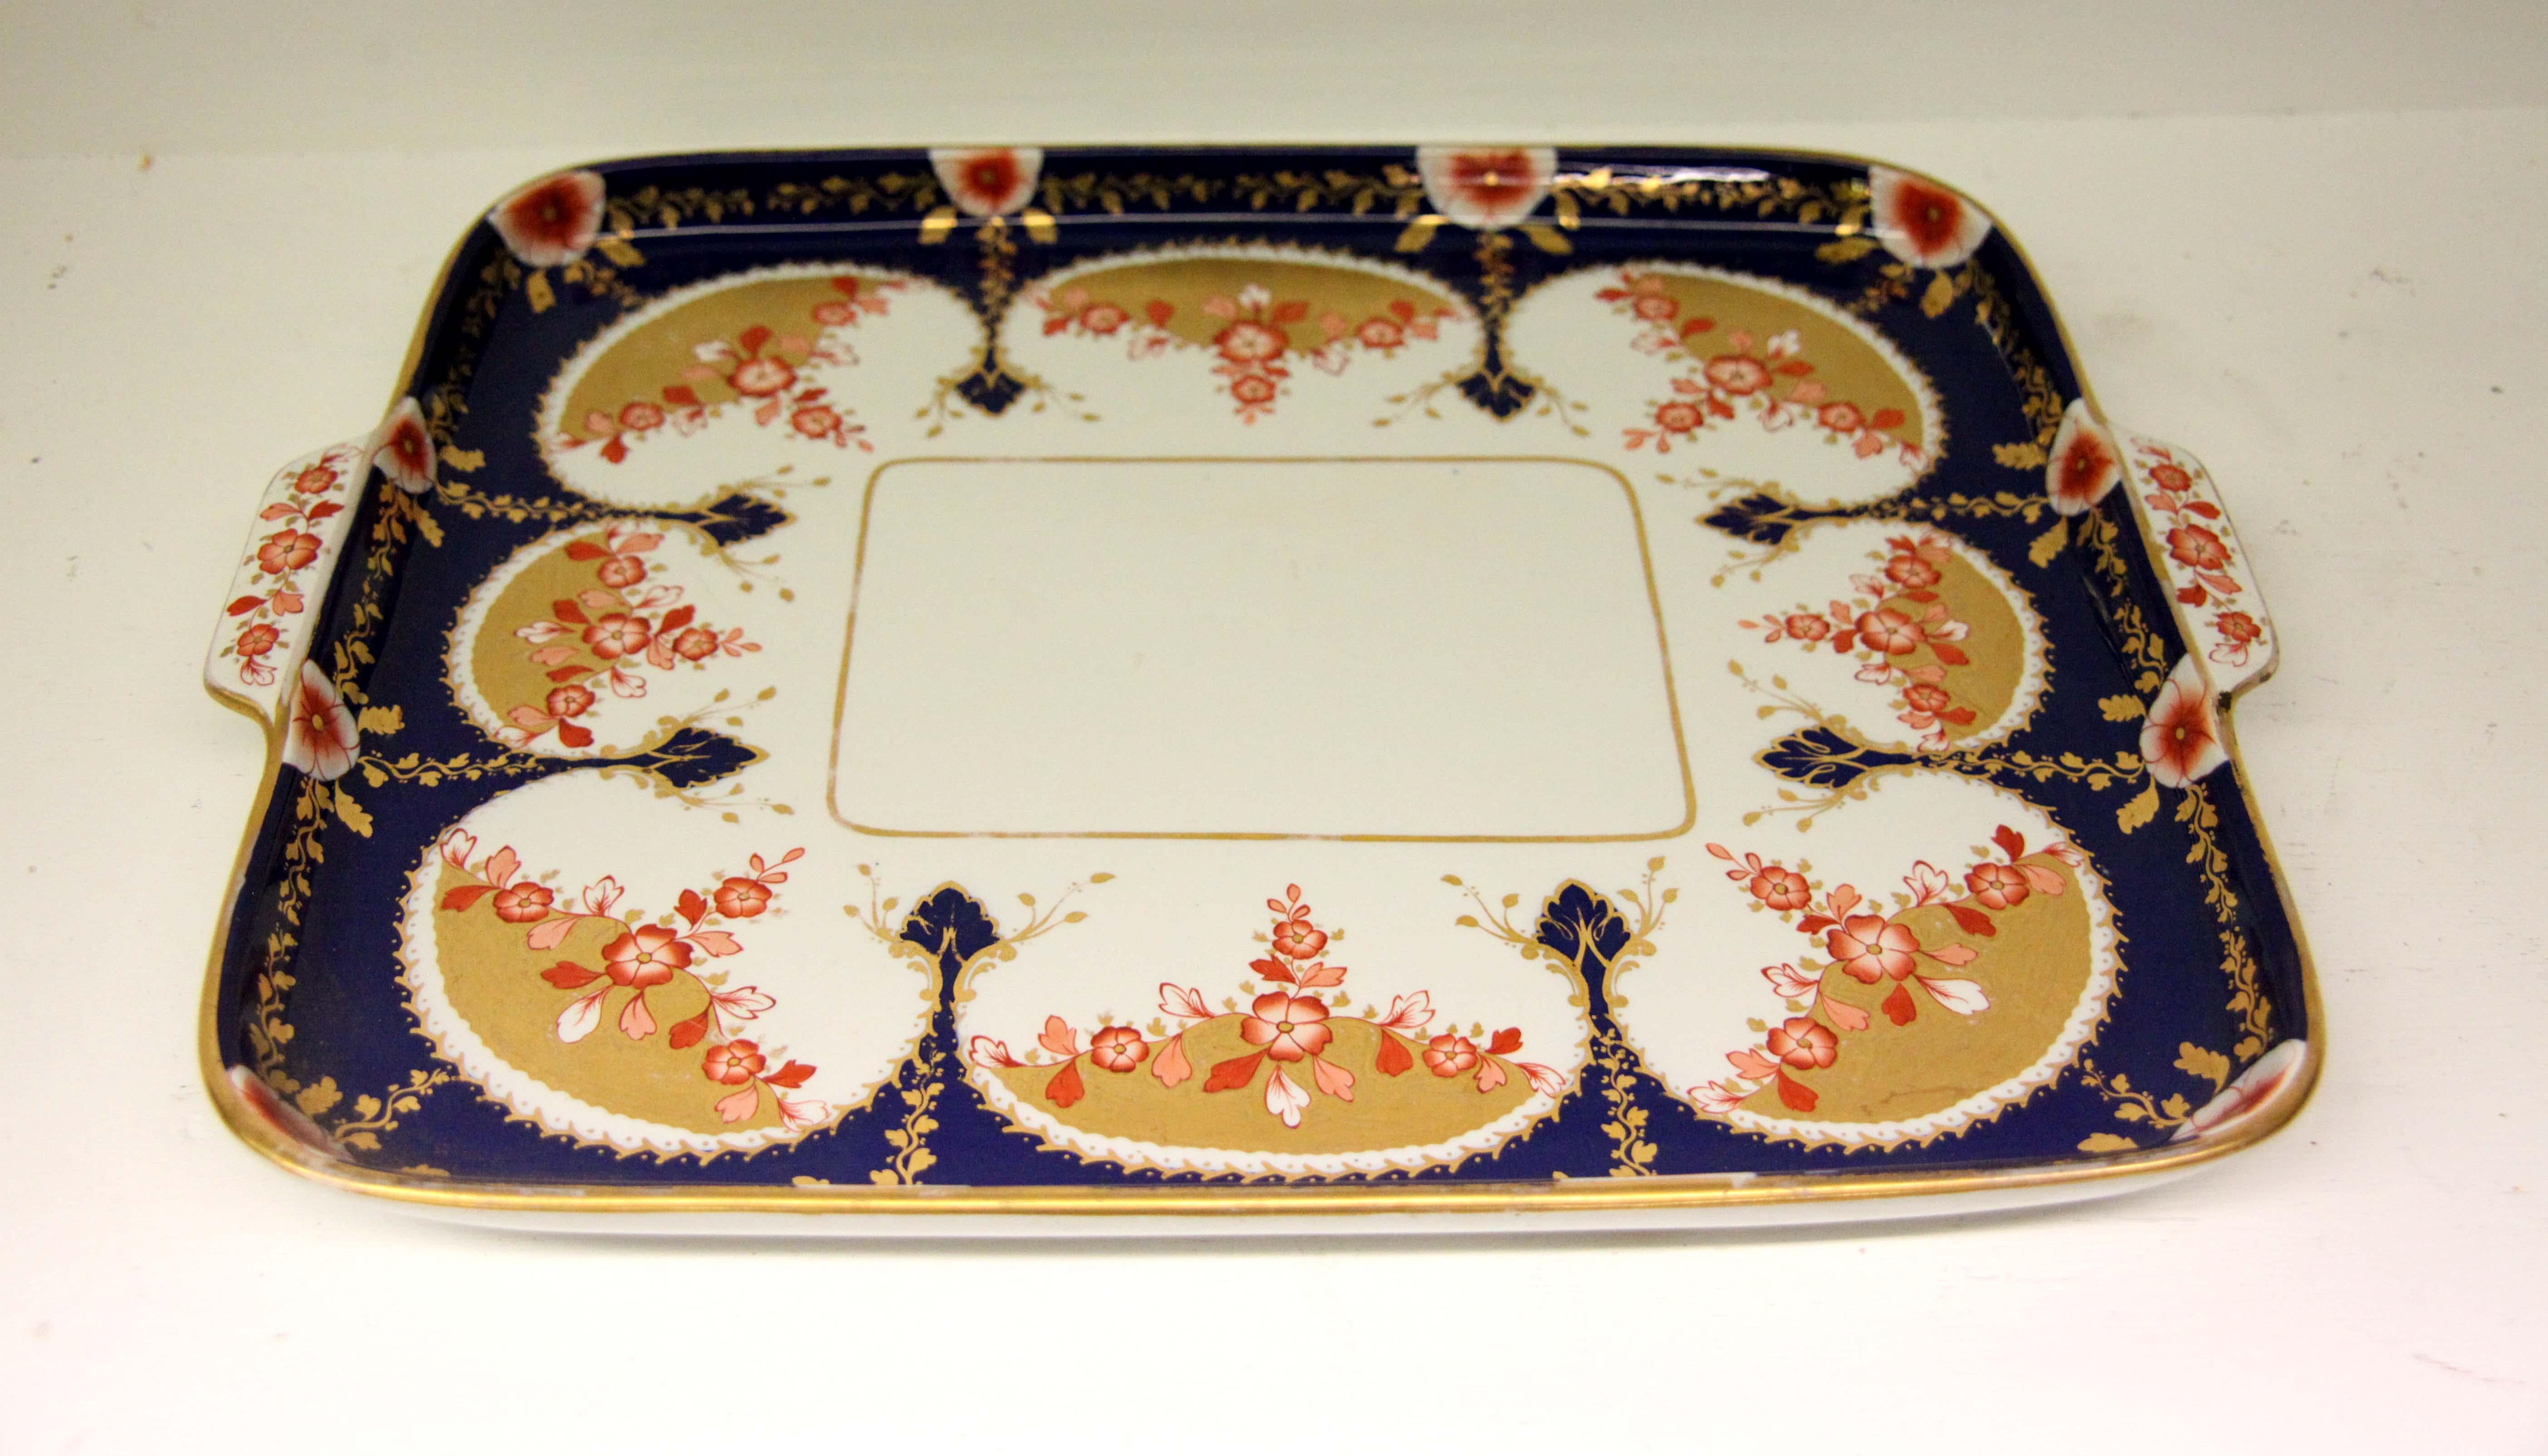 19th century English Copeland porcelain serving tray, the two handled tray with a cobalt border featuring stylized spears adorned with gilt foliate, coral and orange colored flower swags on a gold ground.